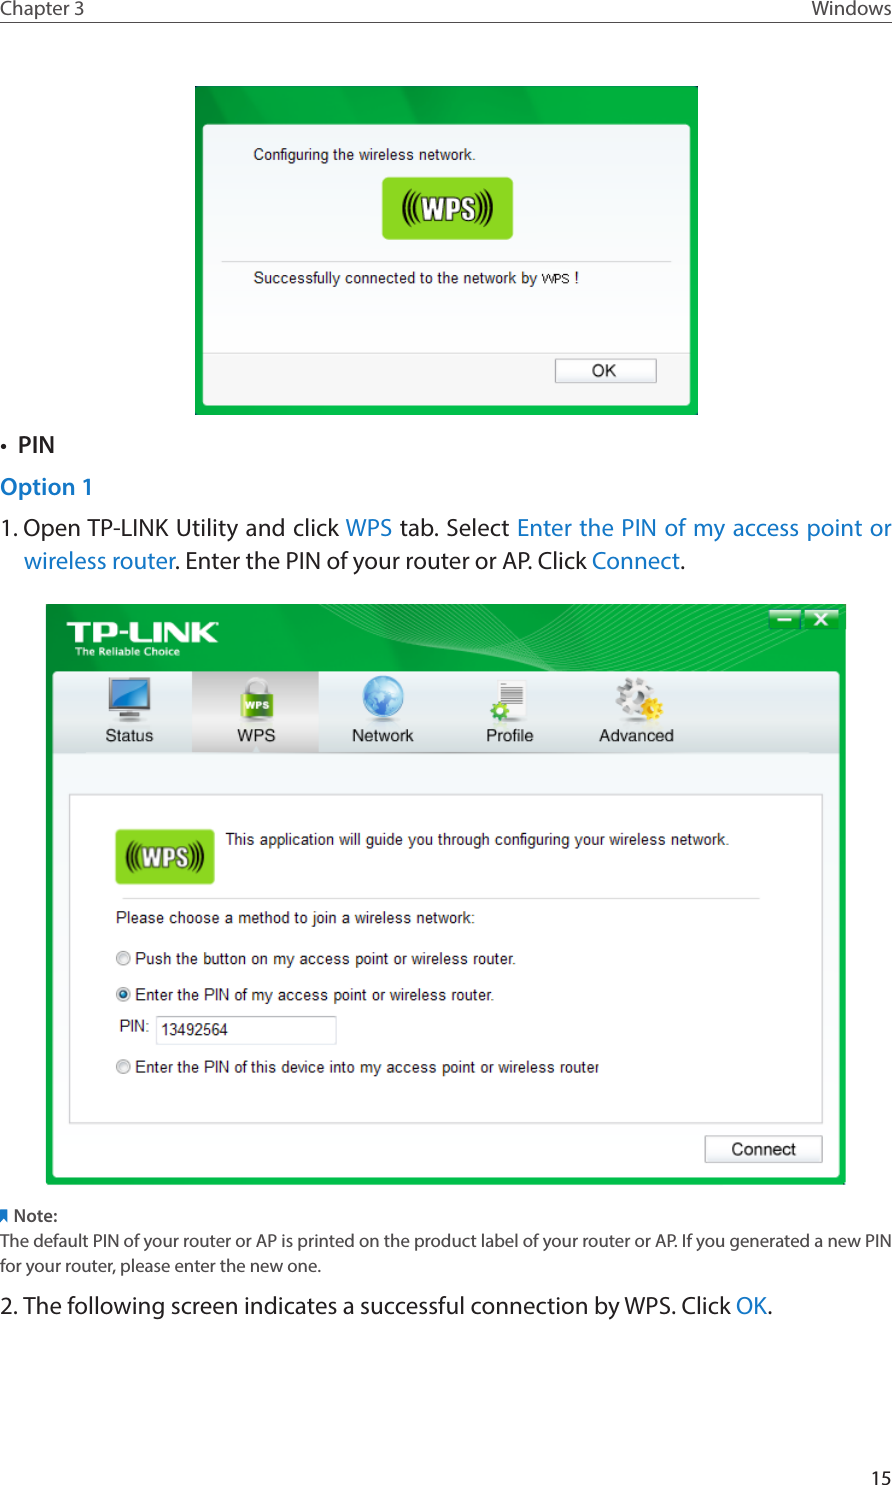 15Chapter 3 Windows•  PINOption 11. Open TP-LINK Utility and click WPS tab. Select Enter the PIN of my access point or wireless router. Enter the PIN of your router or AP. Click Connect.Note:The default PIN of your router or AP is printed on the product label of your router or AP. If you generated a new PIN for your router, please enter the new one. 2. The following screen indicates a successful connection by WPS. Click OK.